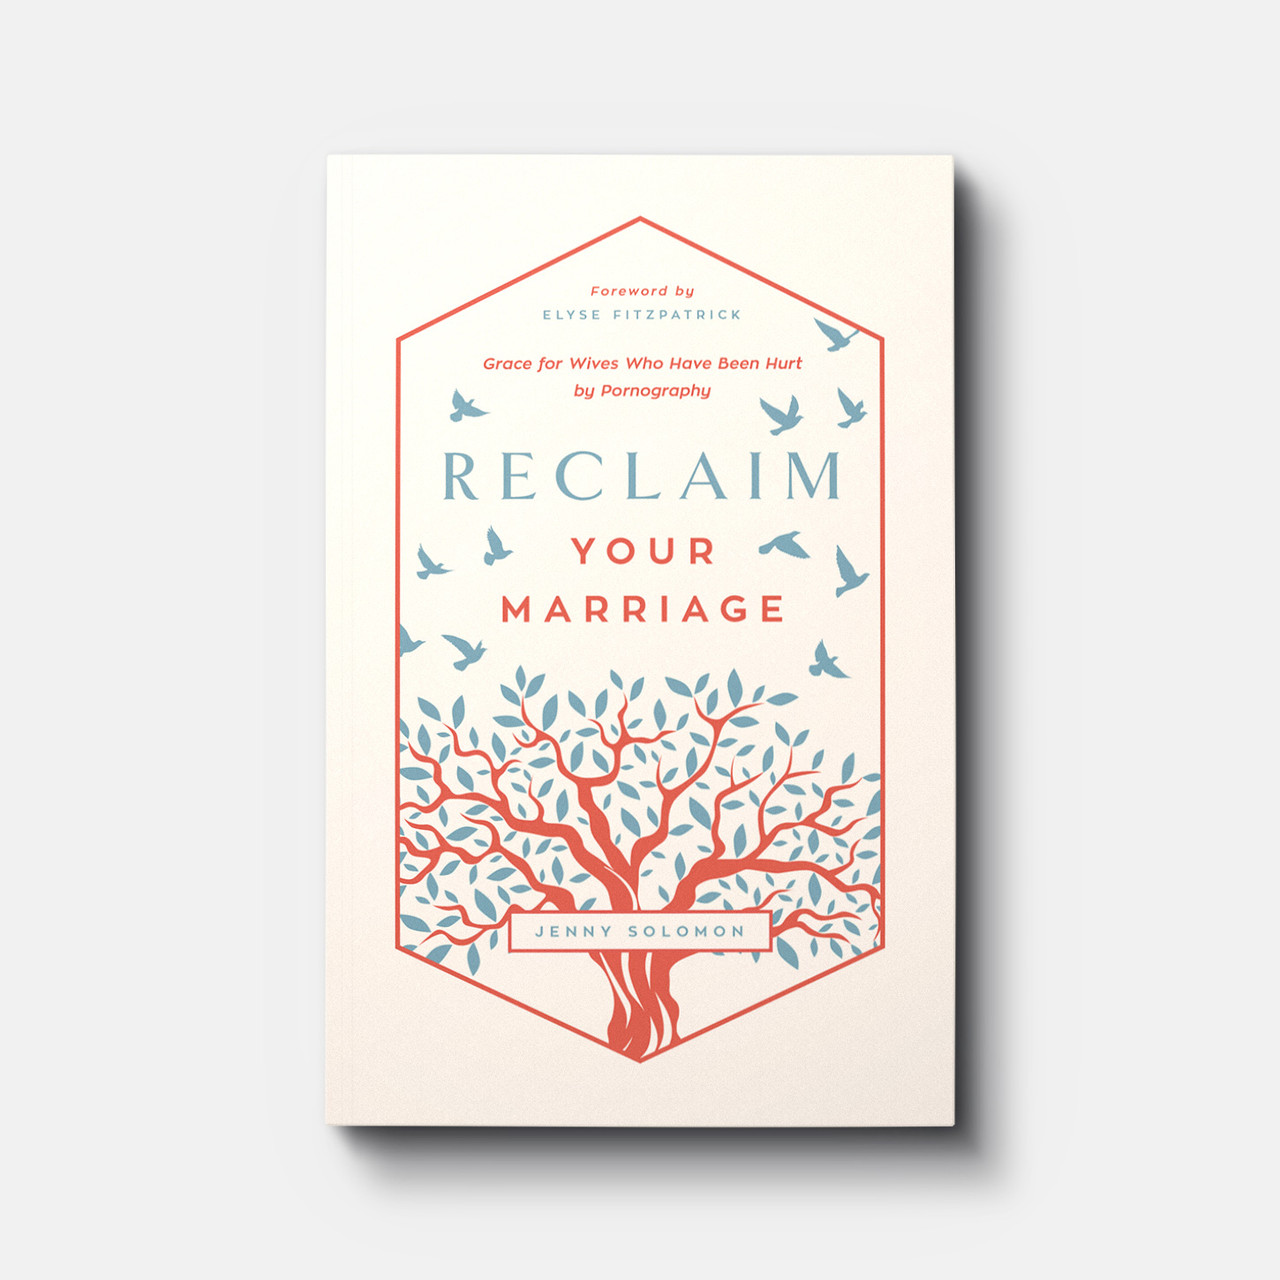 Buy Reclaim Your Marriage Grace for Wives Who Have Been Hurt by Pornography, Coming Soon